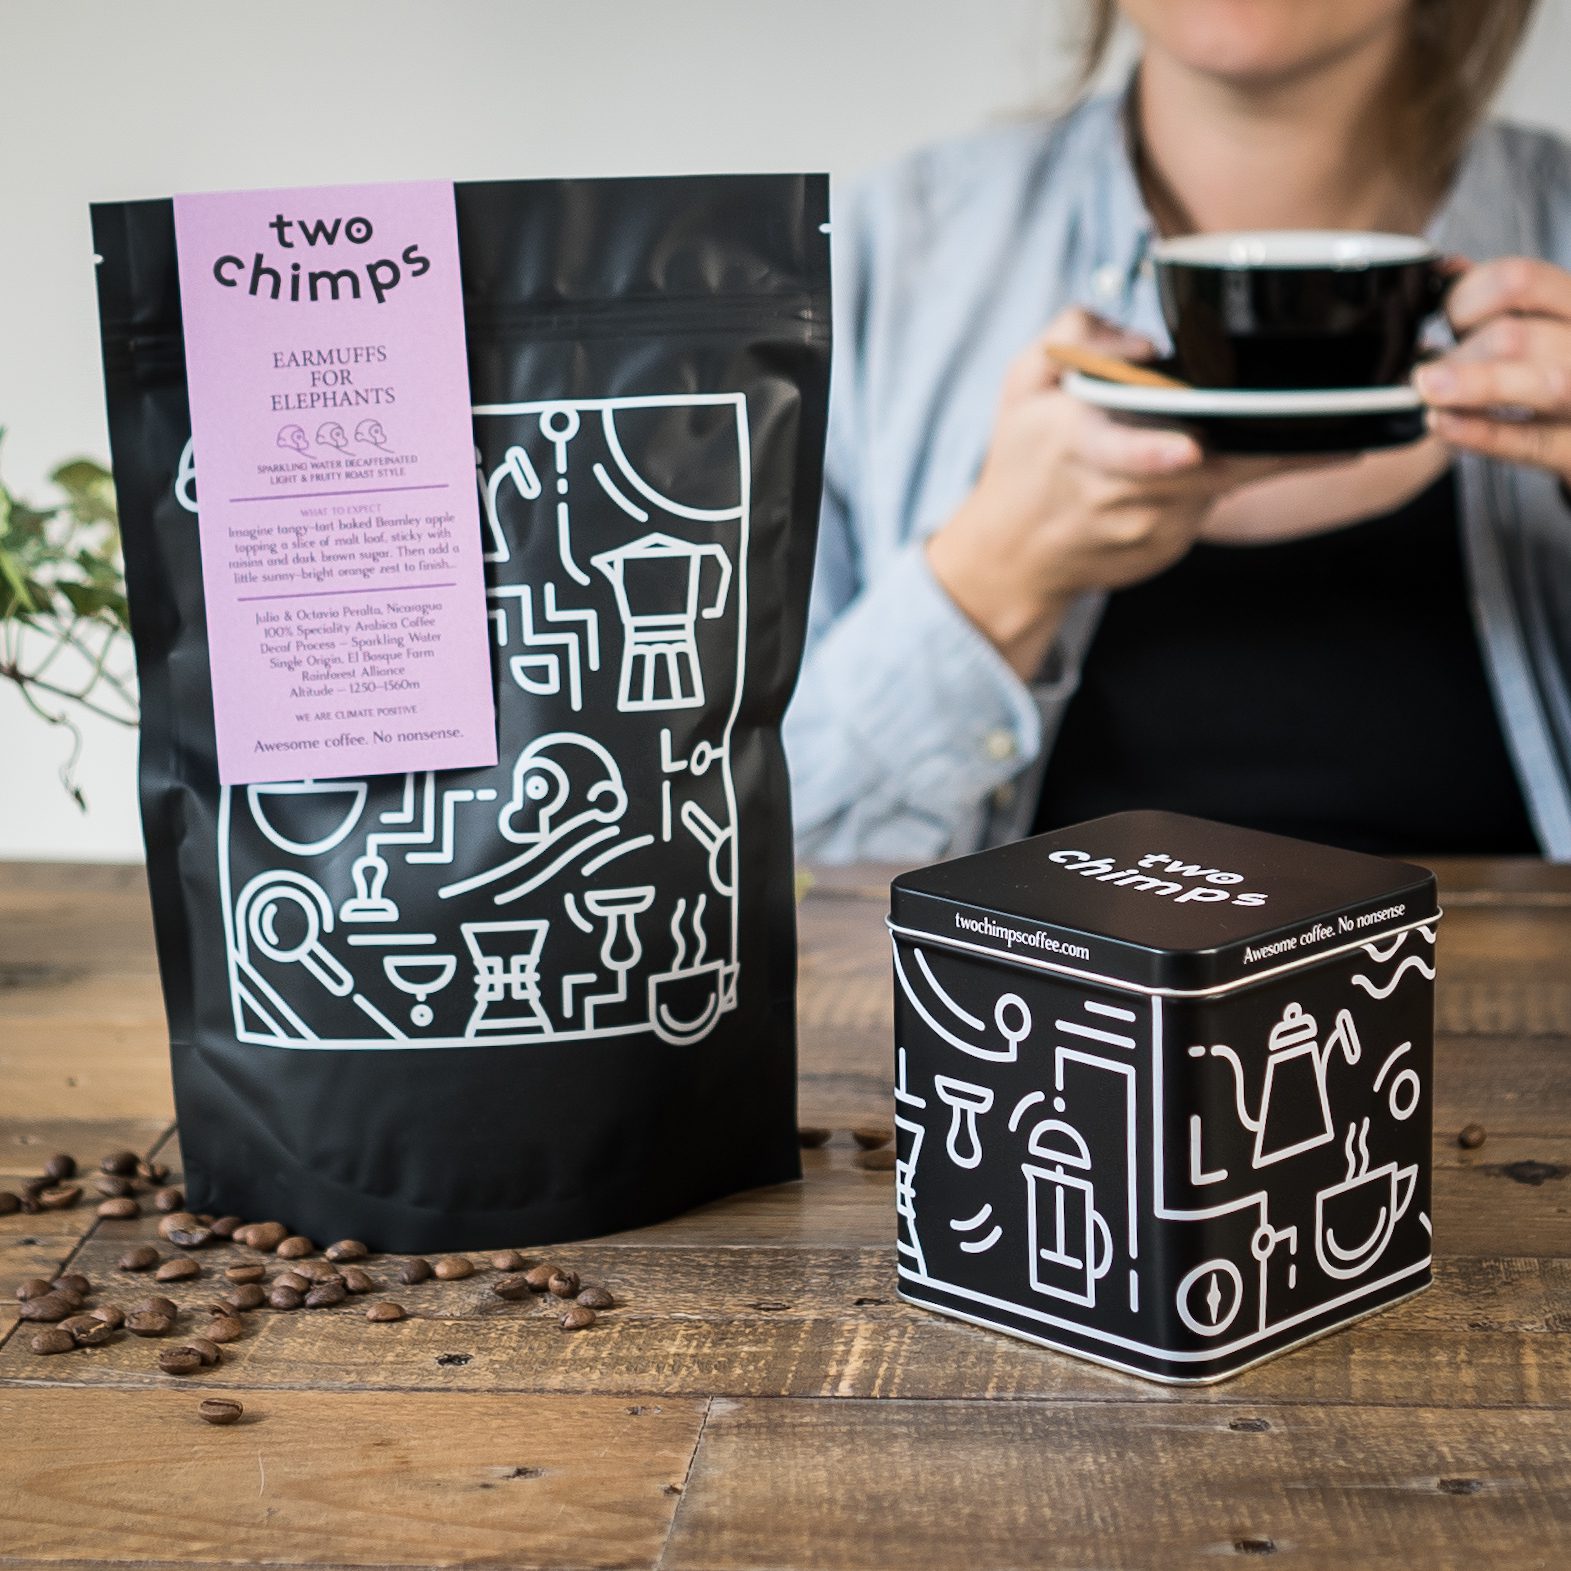 Bag of Two Chimps decaf coffee on a table with coffee tin and woman holding black cup and saucer